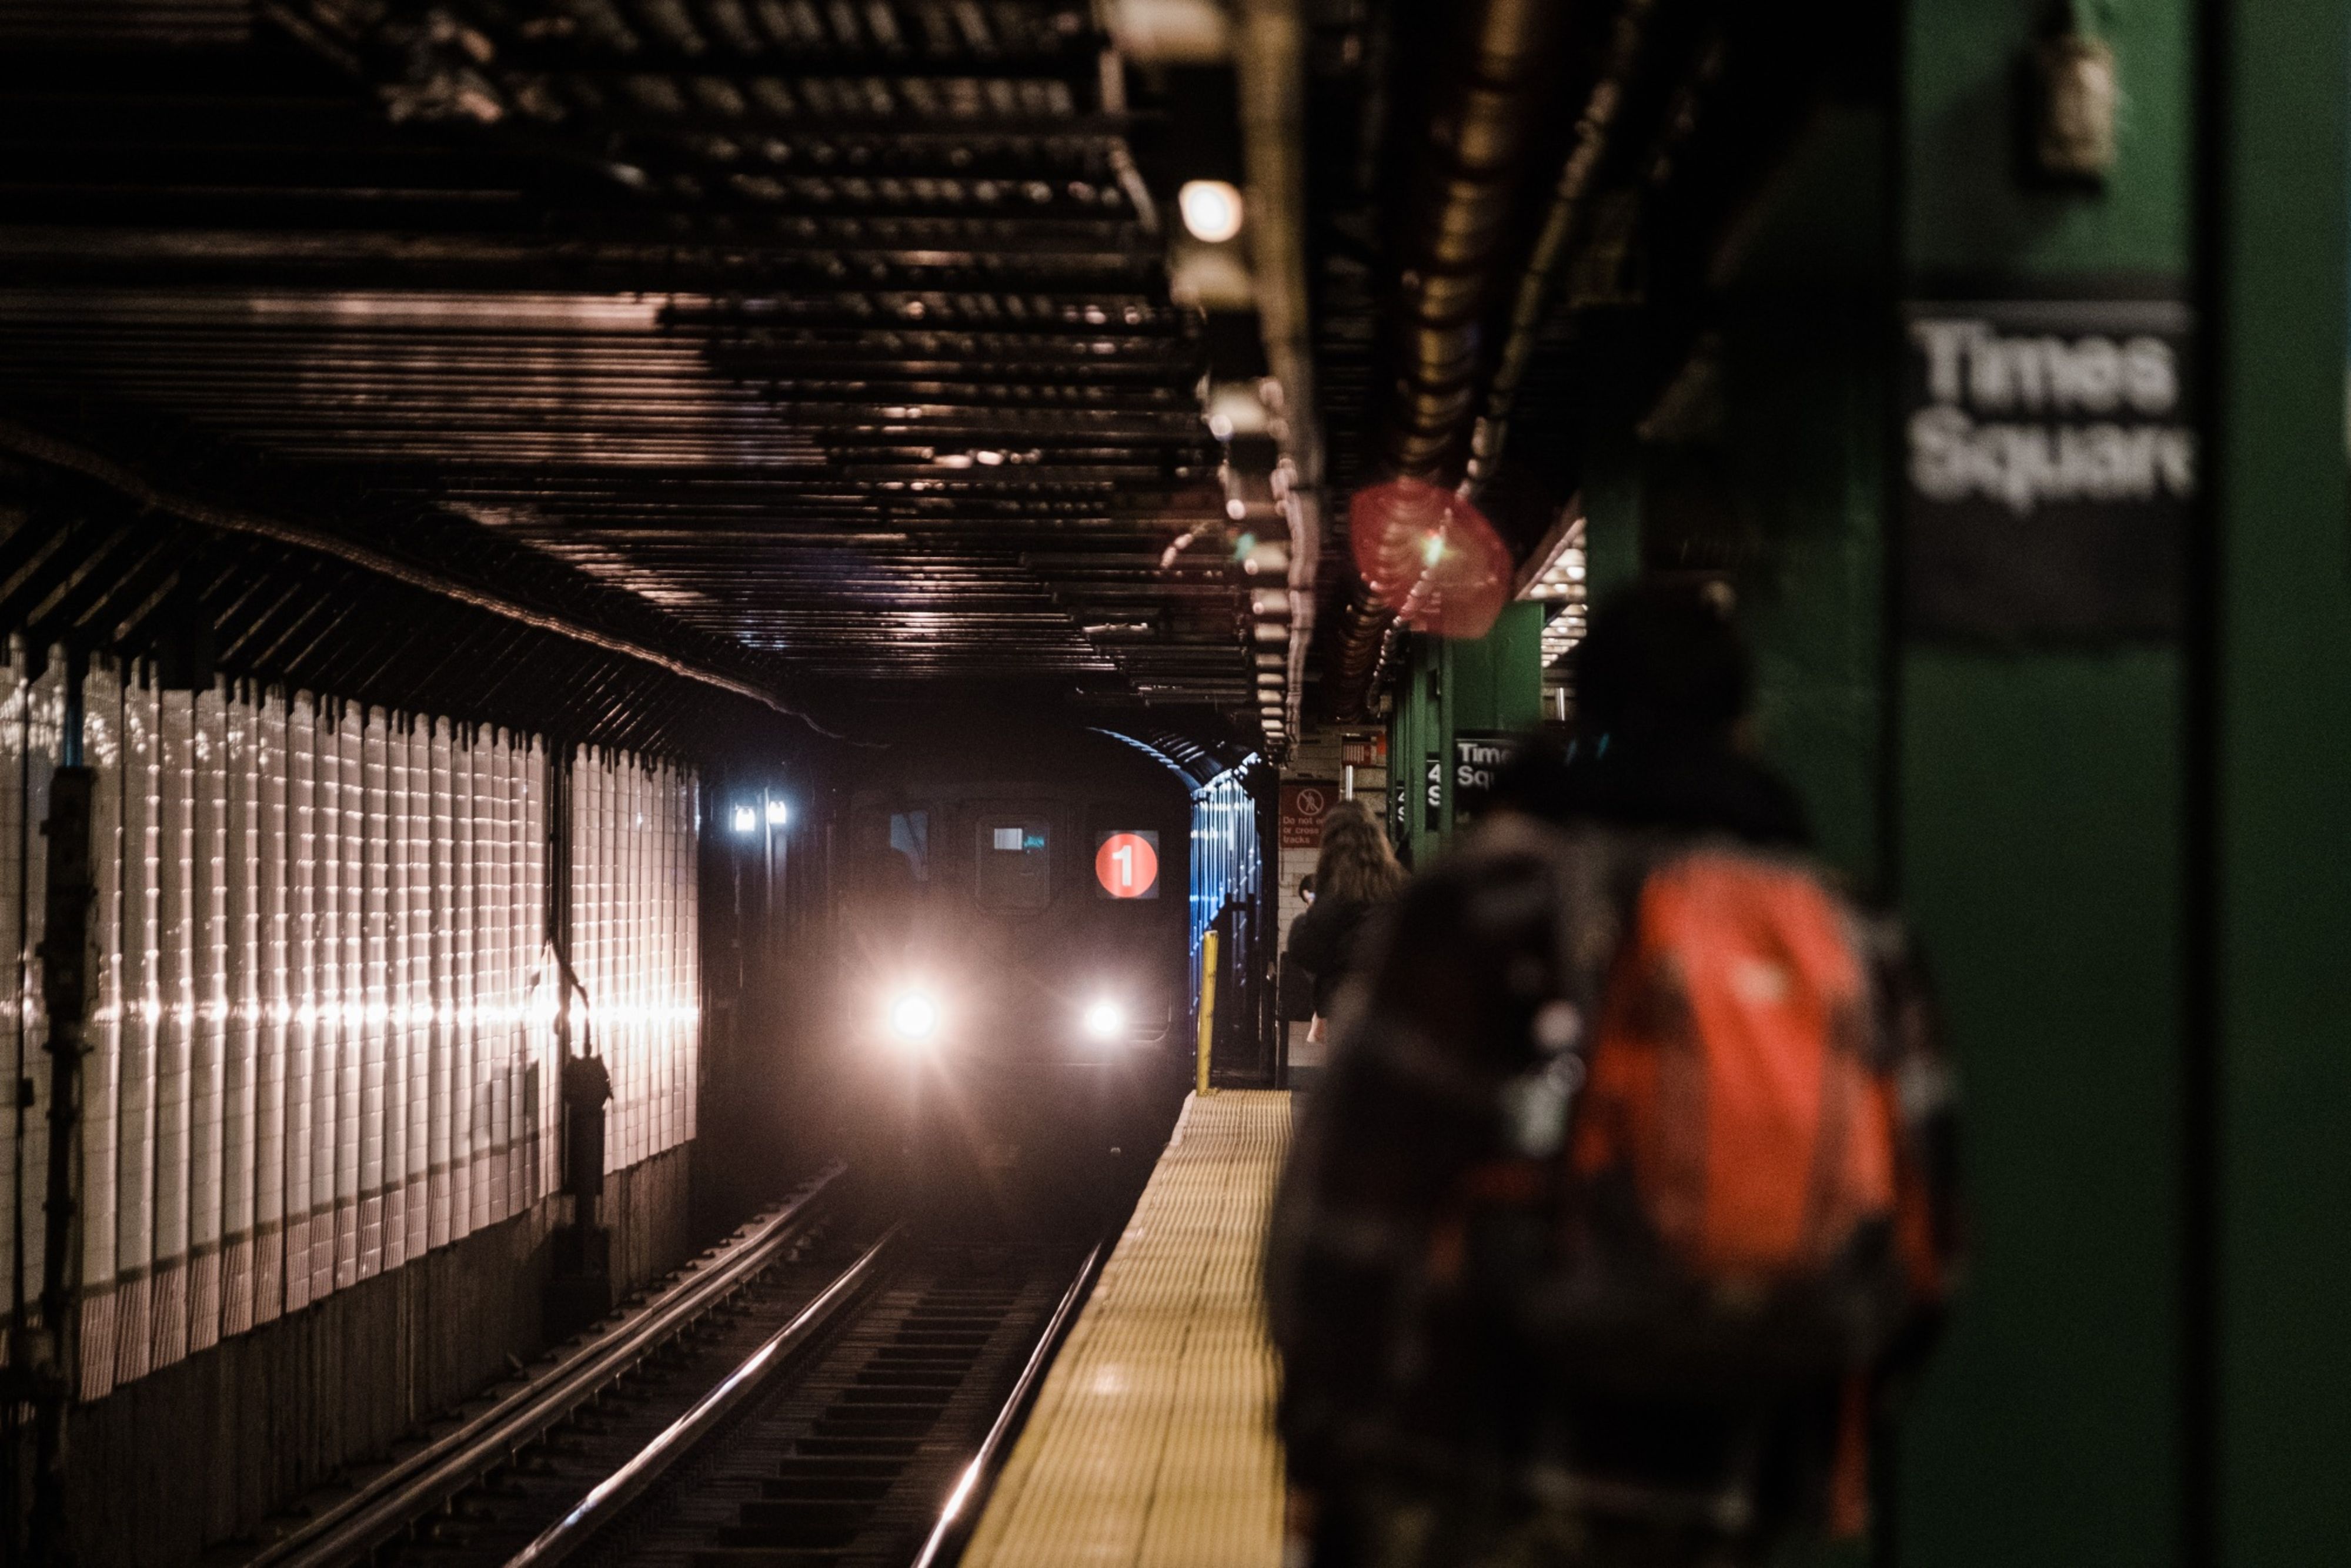 Light at the end of the tunnel? New York's Metropolitan Transportation Authority plans for&nbsp;drastic cuts to subway, bus and commuter rail service unless federal aid arrives.&nbsp;